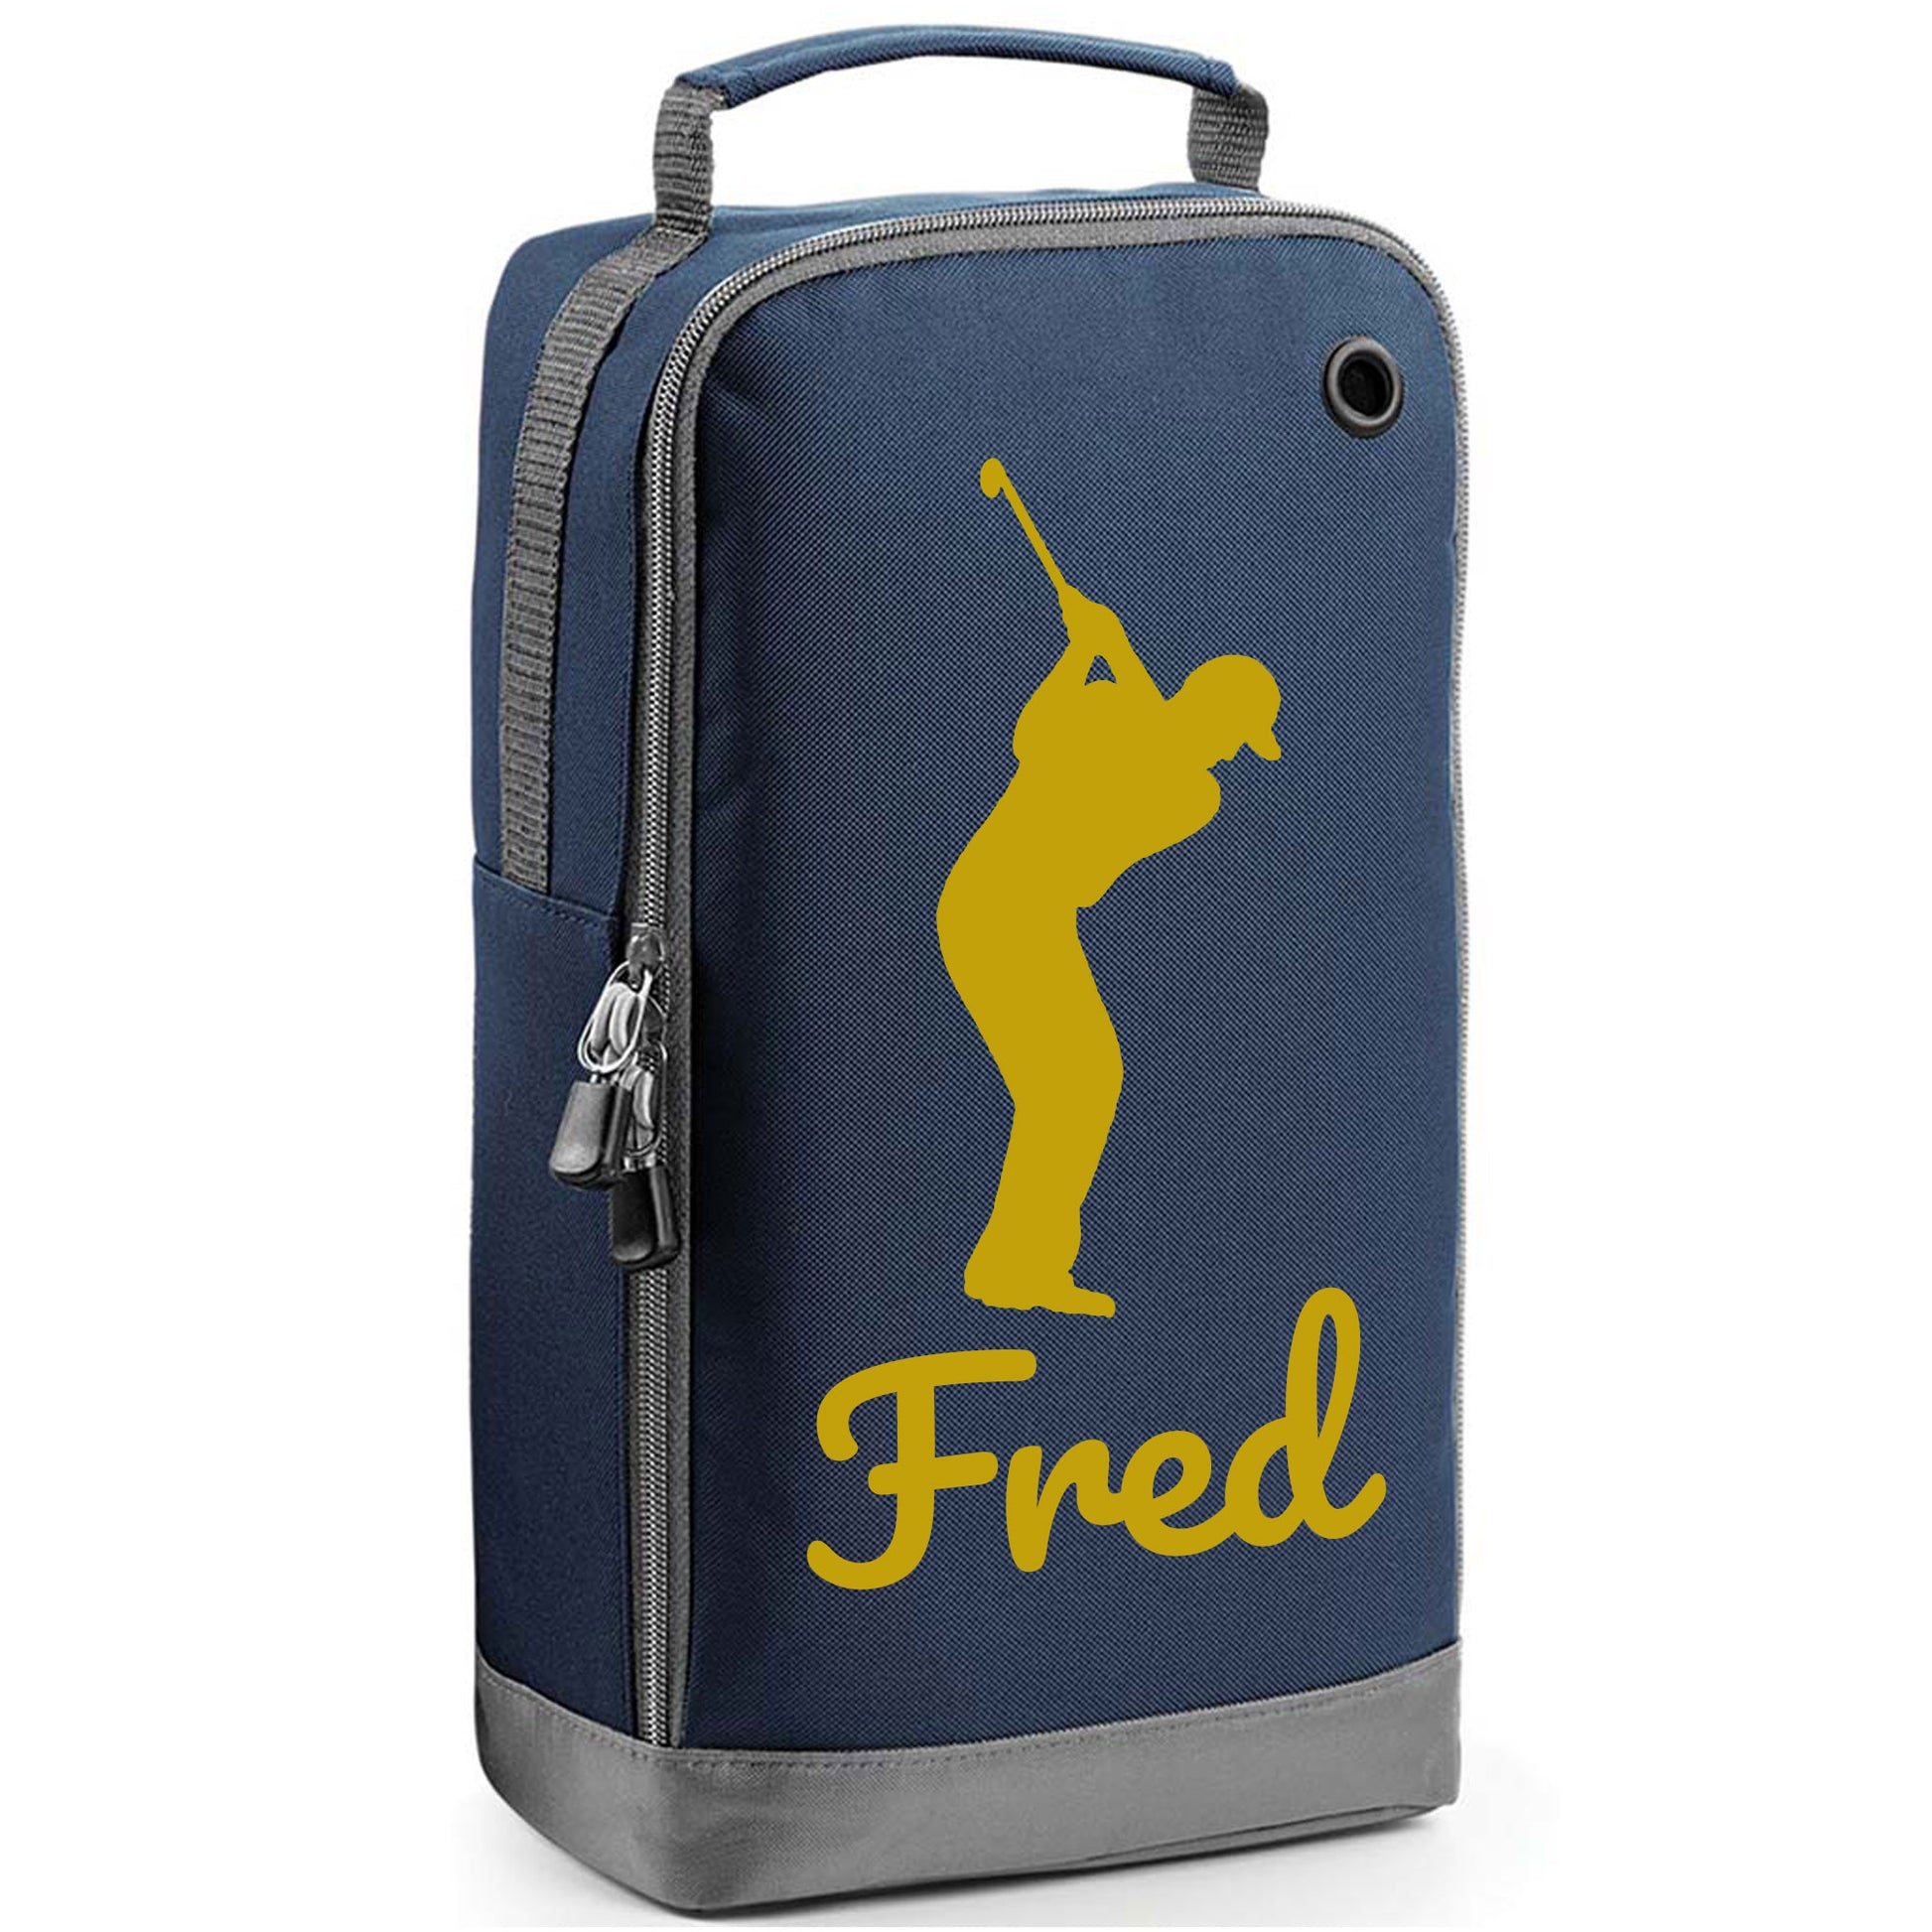 Personalised Golf Shoe Bag with Male Golfer & Name or Initials  - Always Looking Good - Navy  